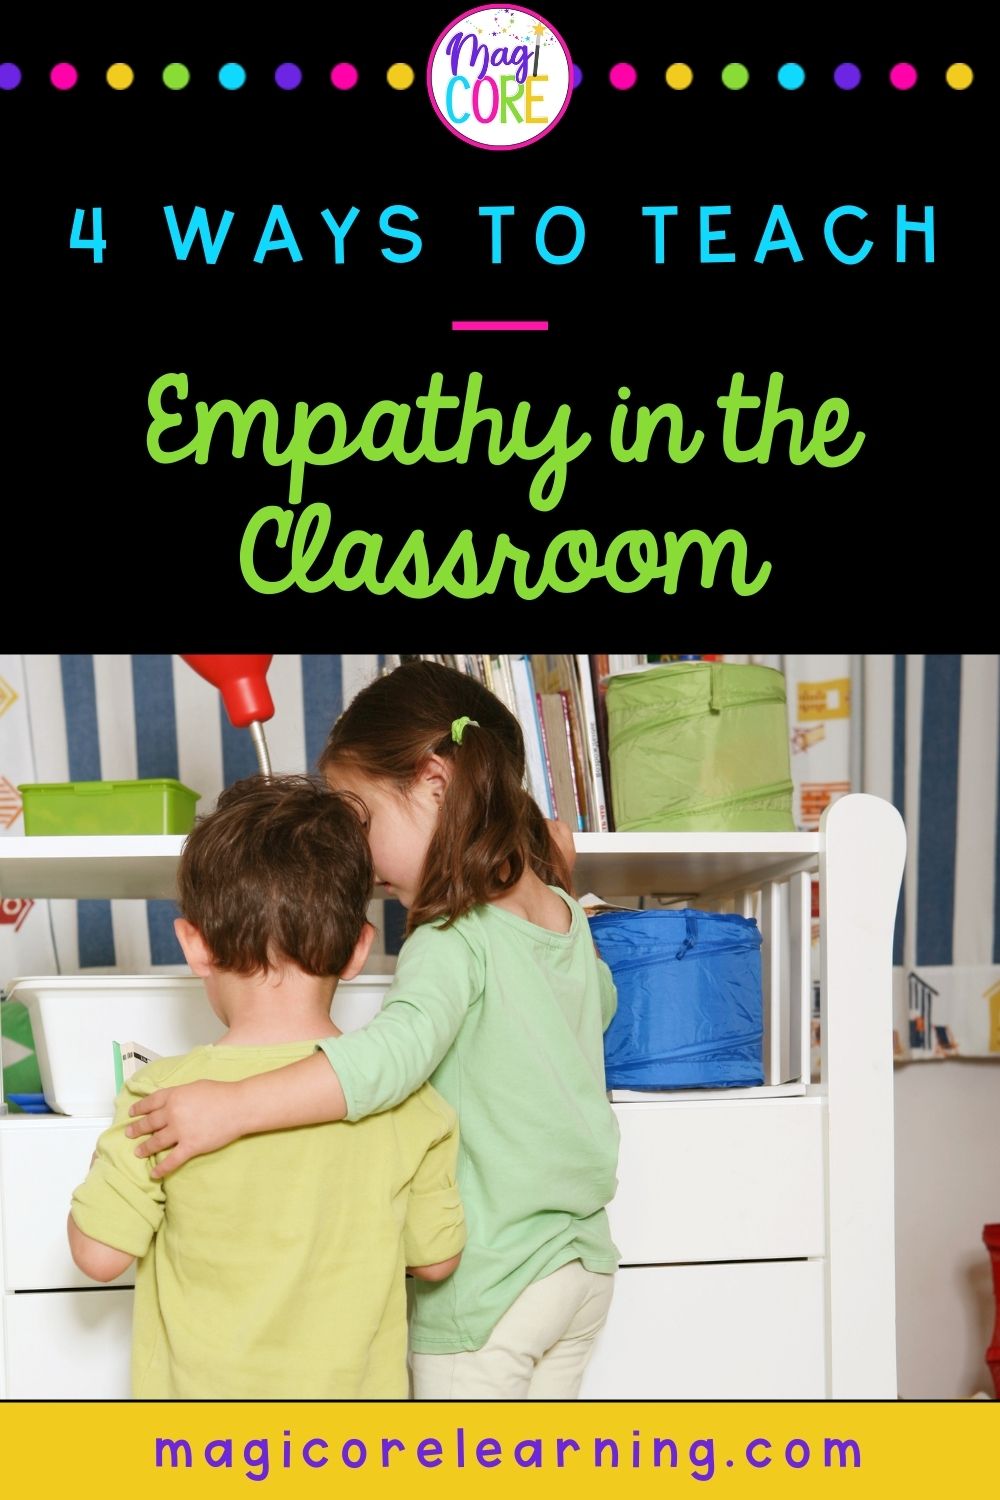 How to teach empathy in the classroom blog post cover showing two students being empathetic